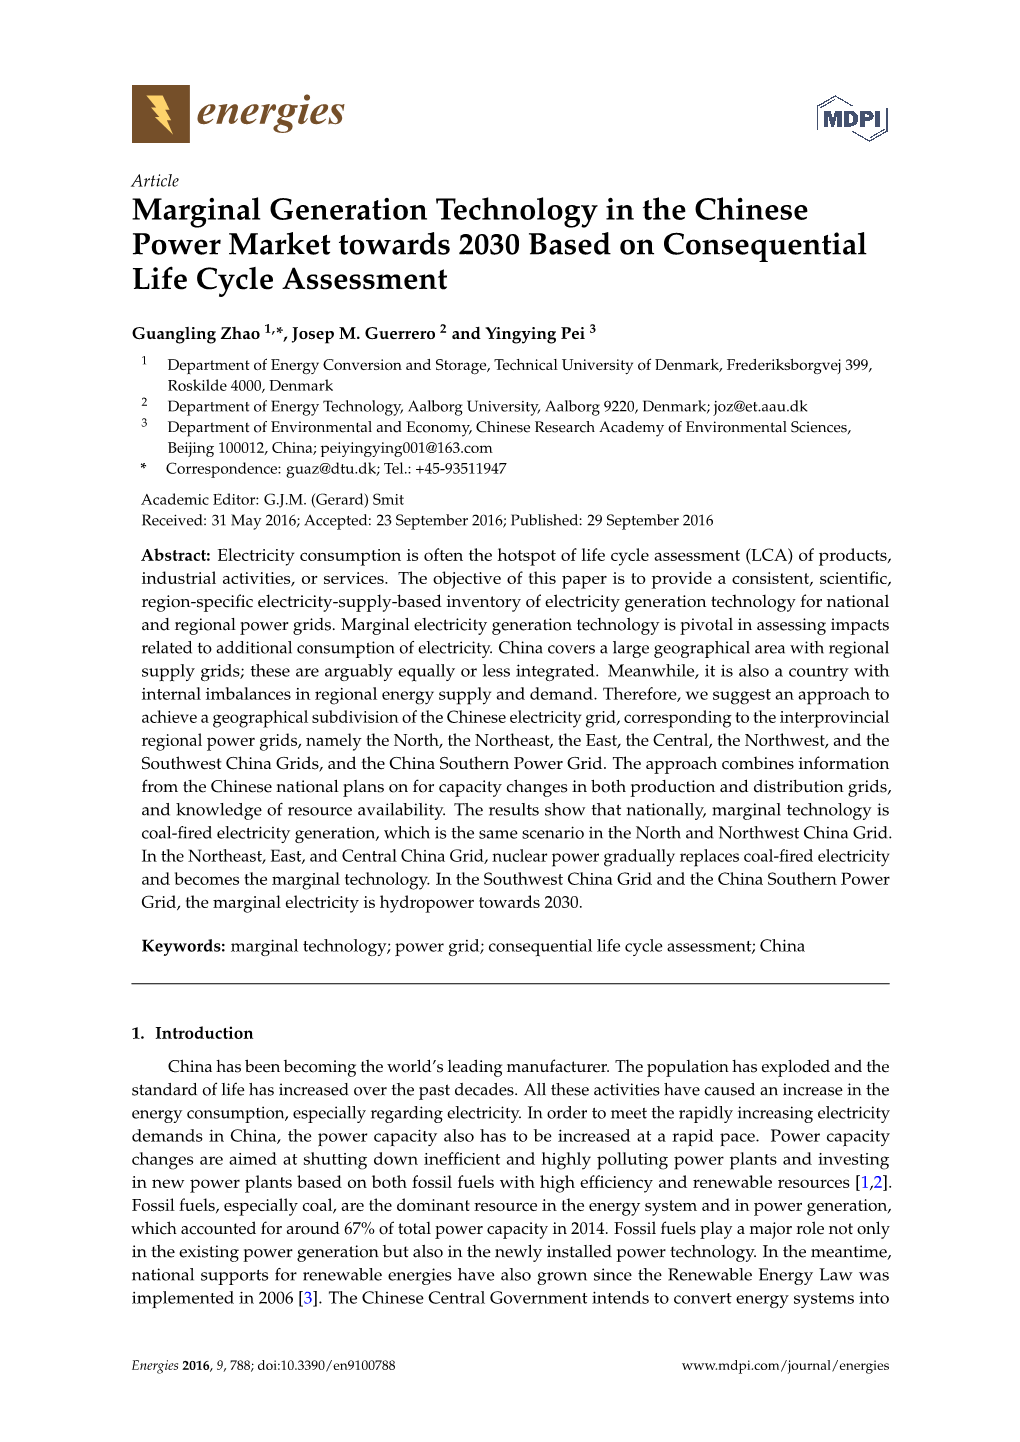 Marginal Generation Technology in the Chinese Power Market Towards 2030 Based on Consequential Life Cycle Assessment